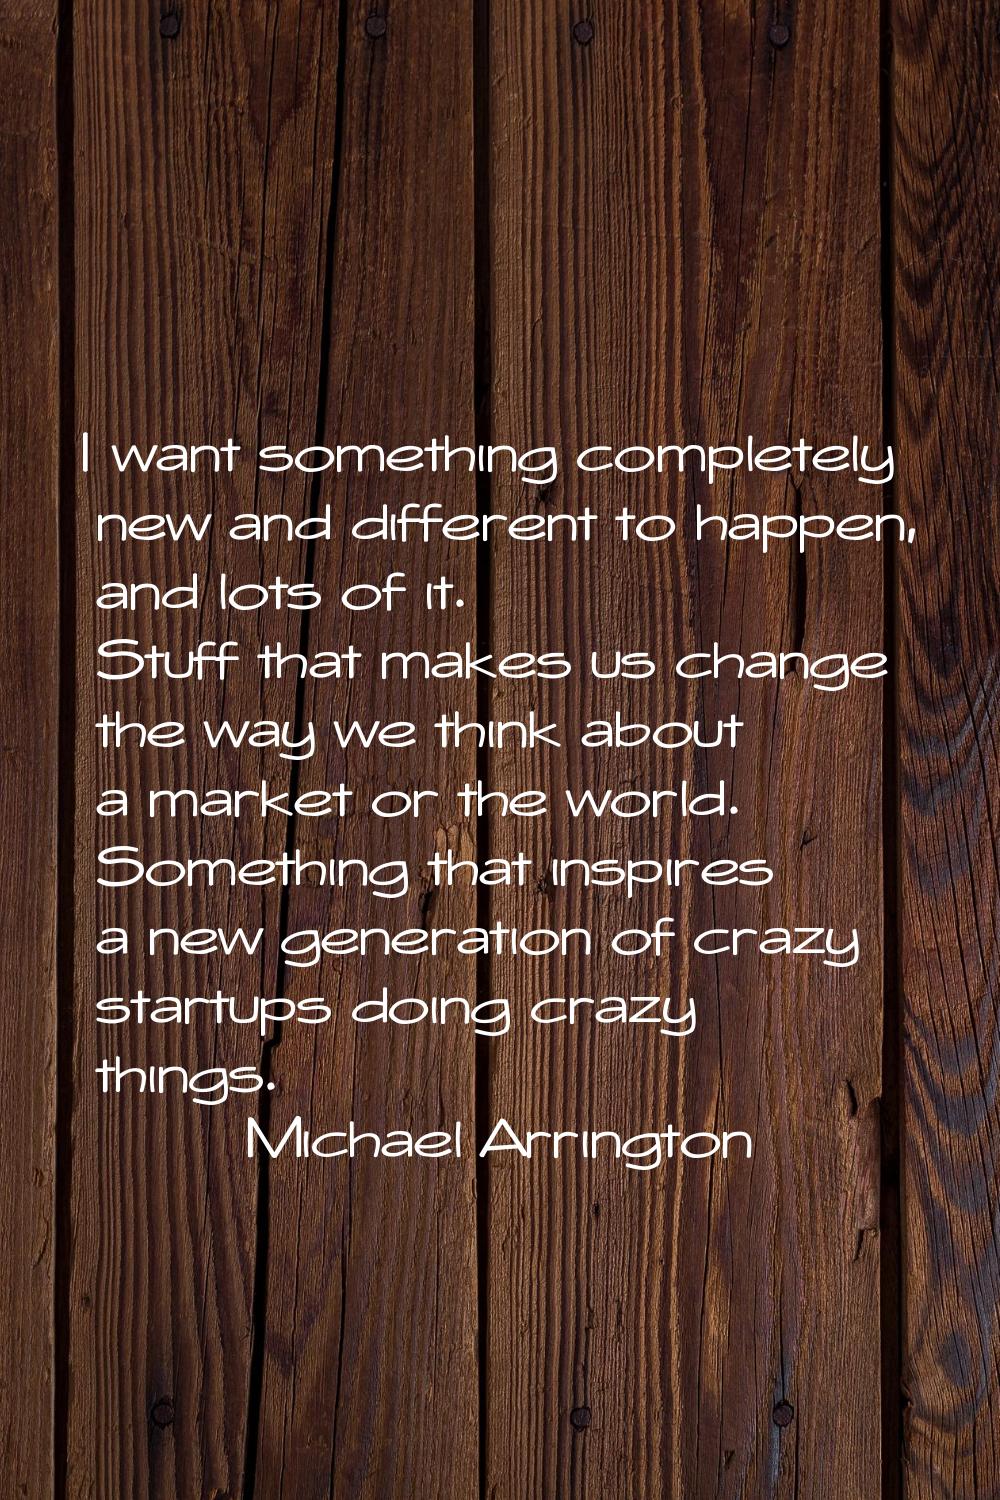 I want something completely new and different to happen, and lots of it. Stuff that makes us change